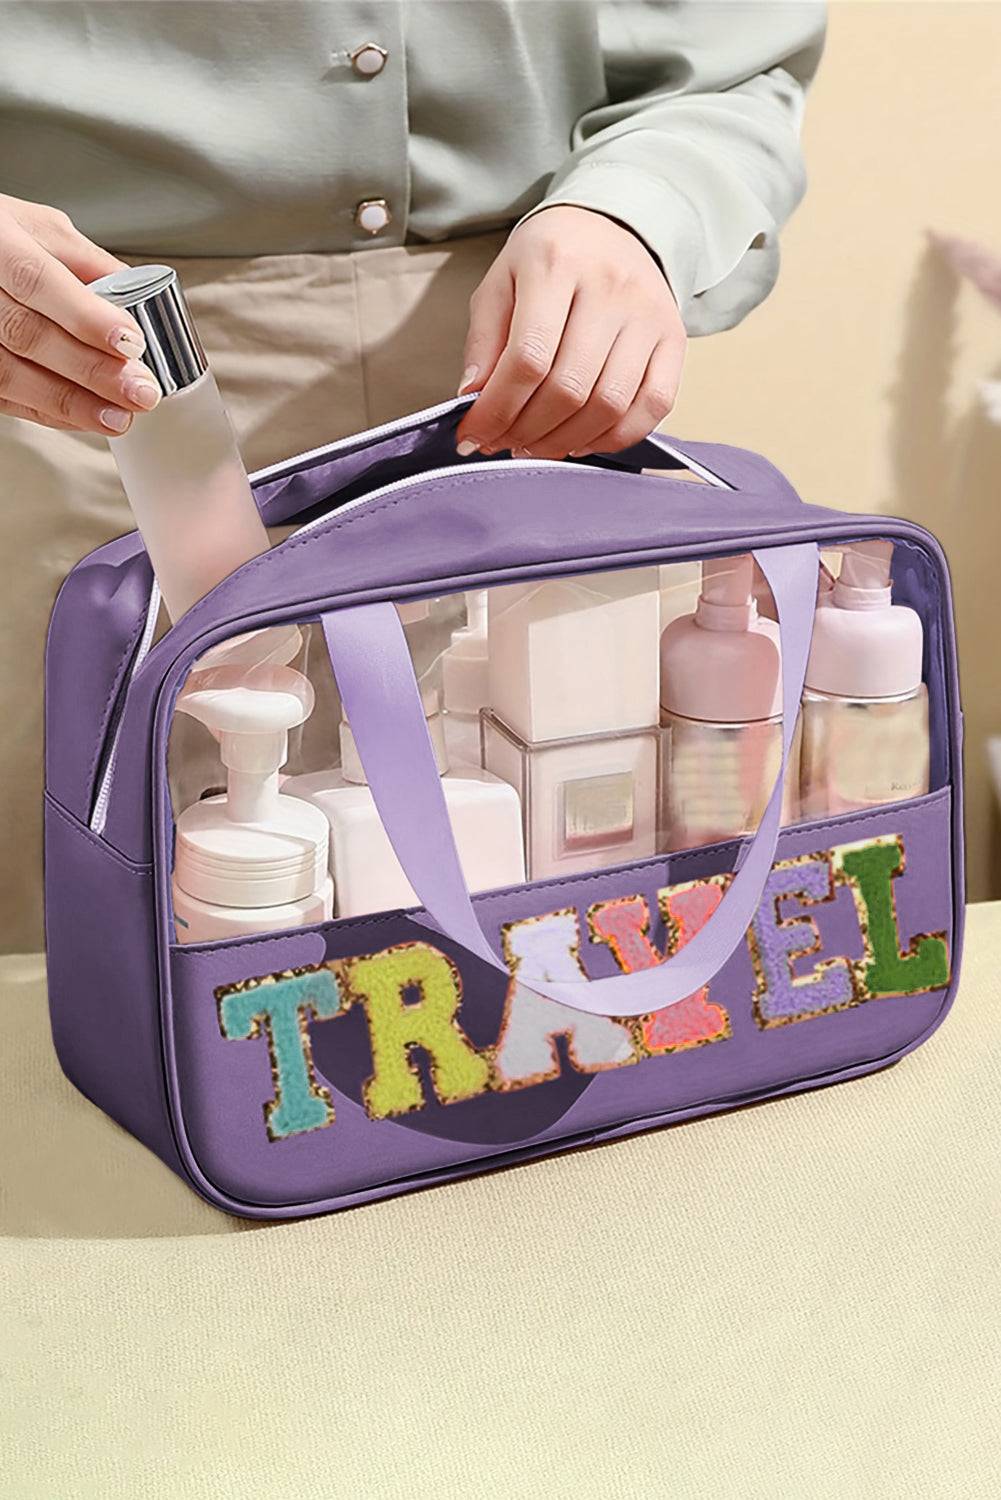 a person holding a purple travel bag filled with personal care products